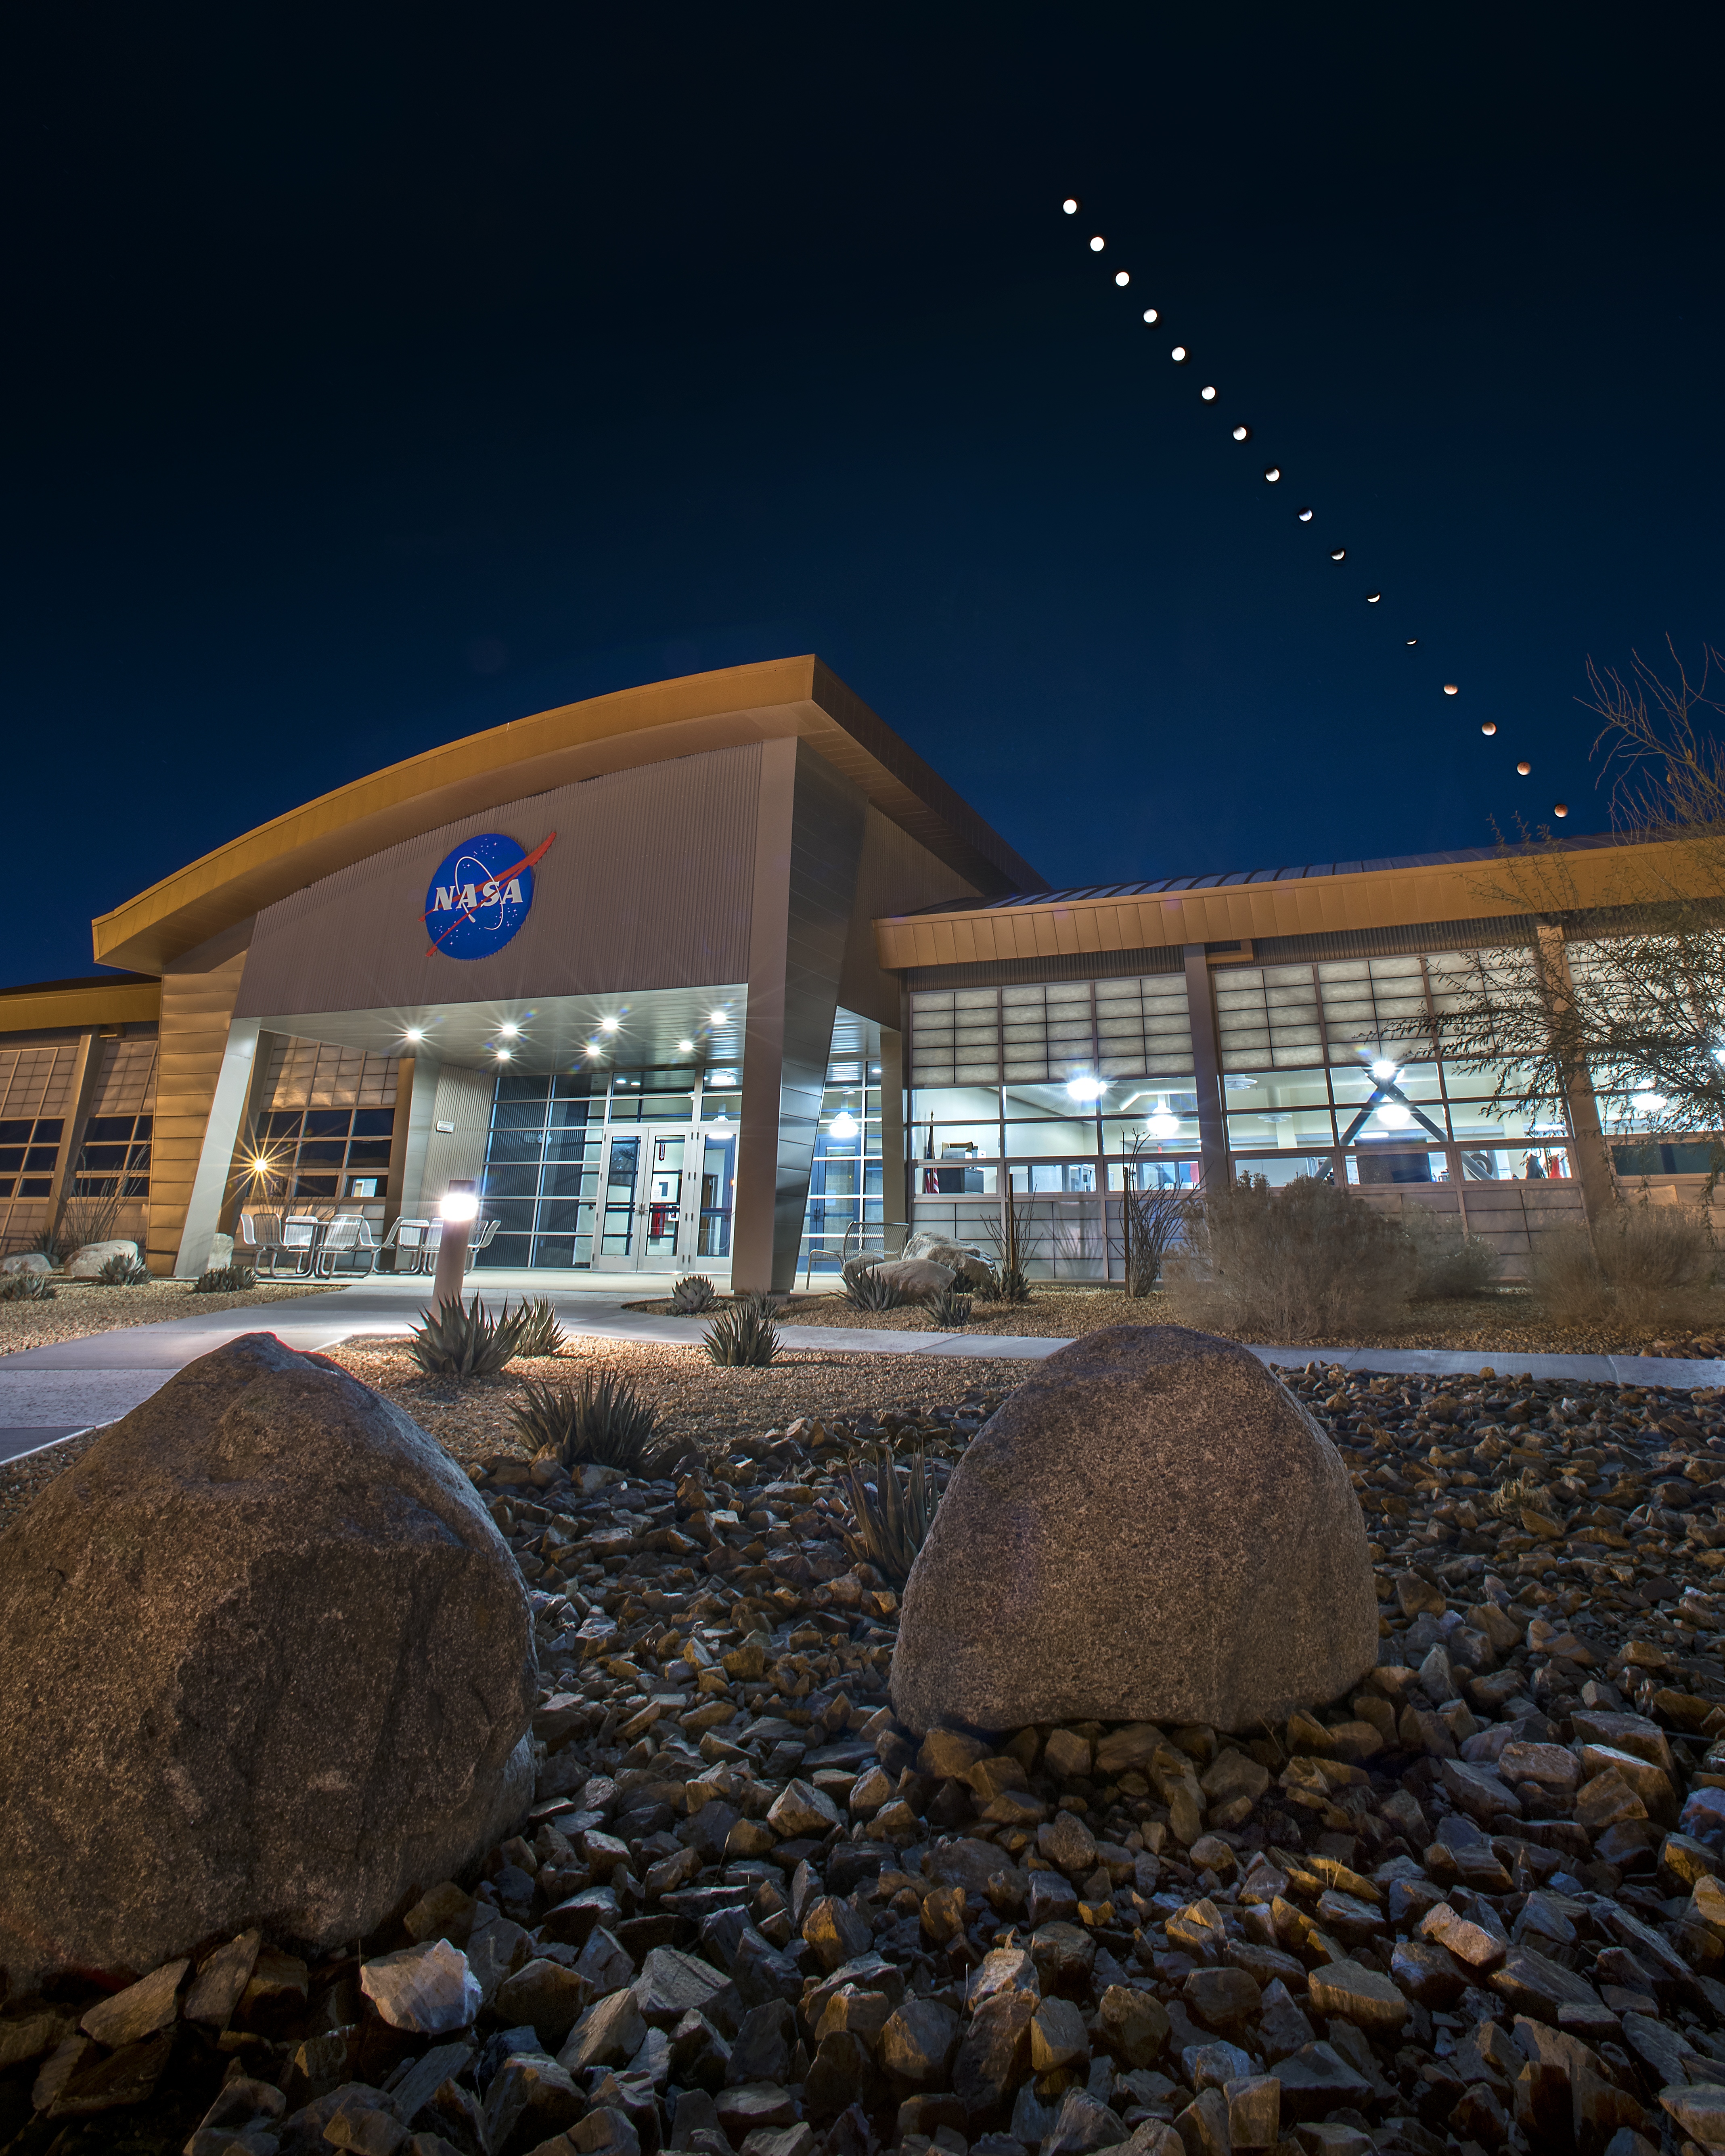 Sequence showing the Moon descending into eclipse above a NASA building.